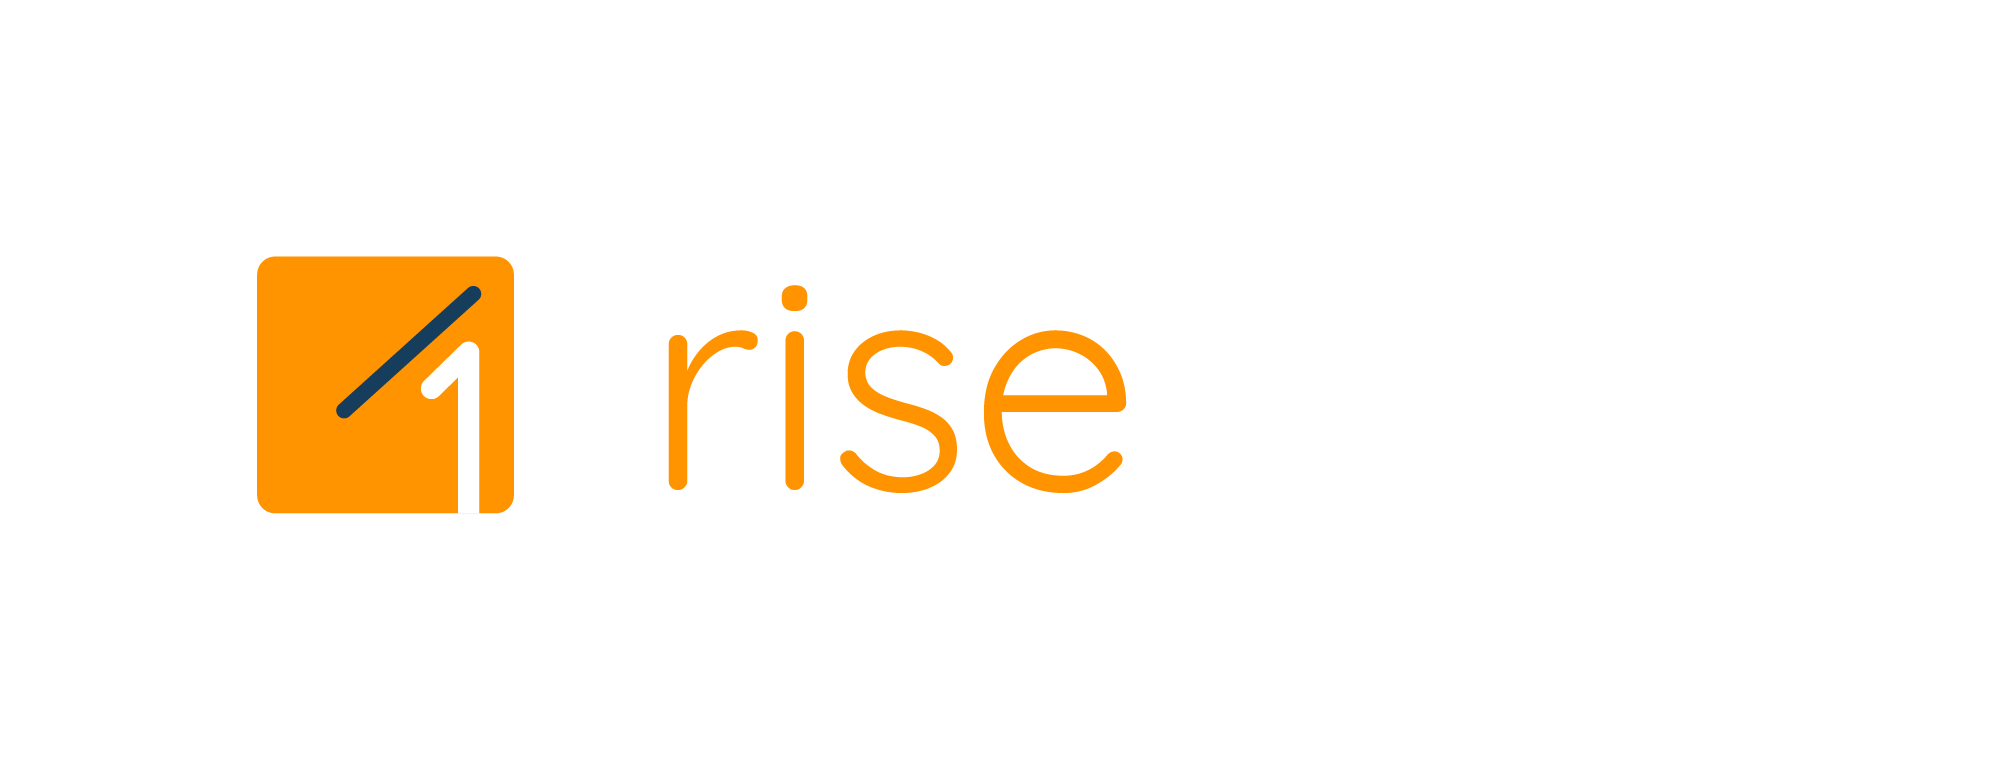 Rise First